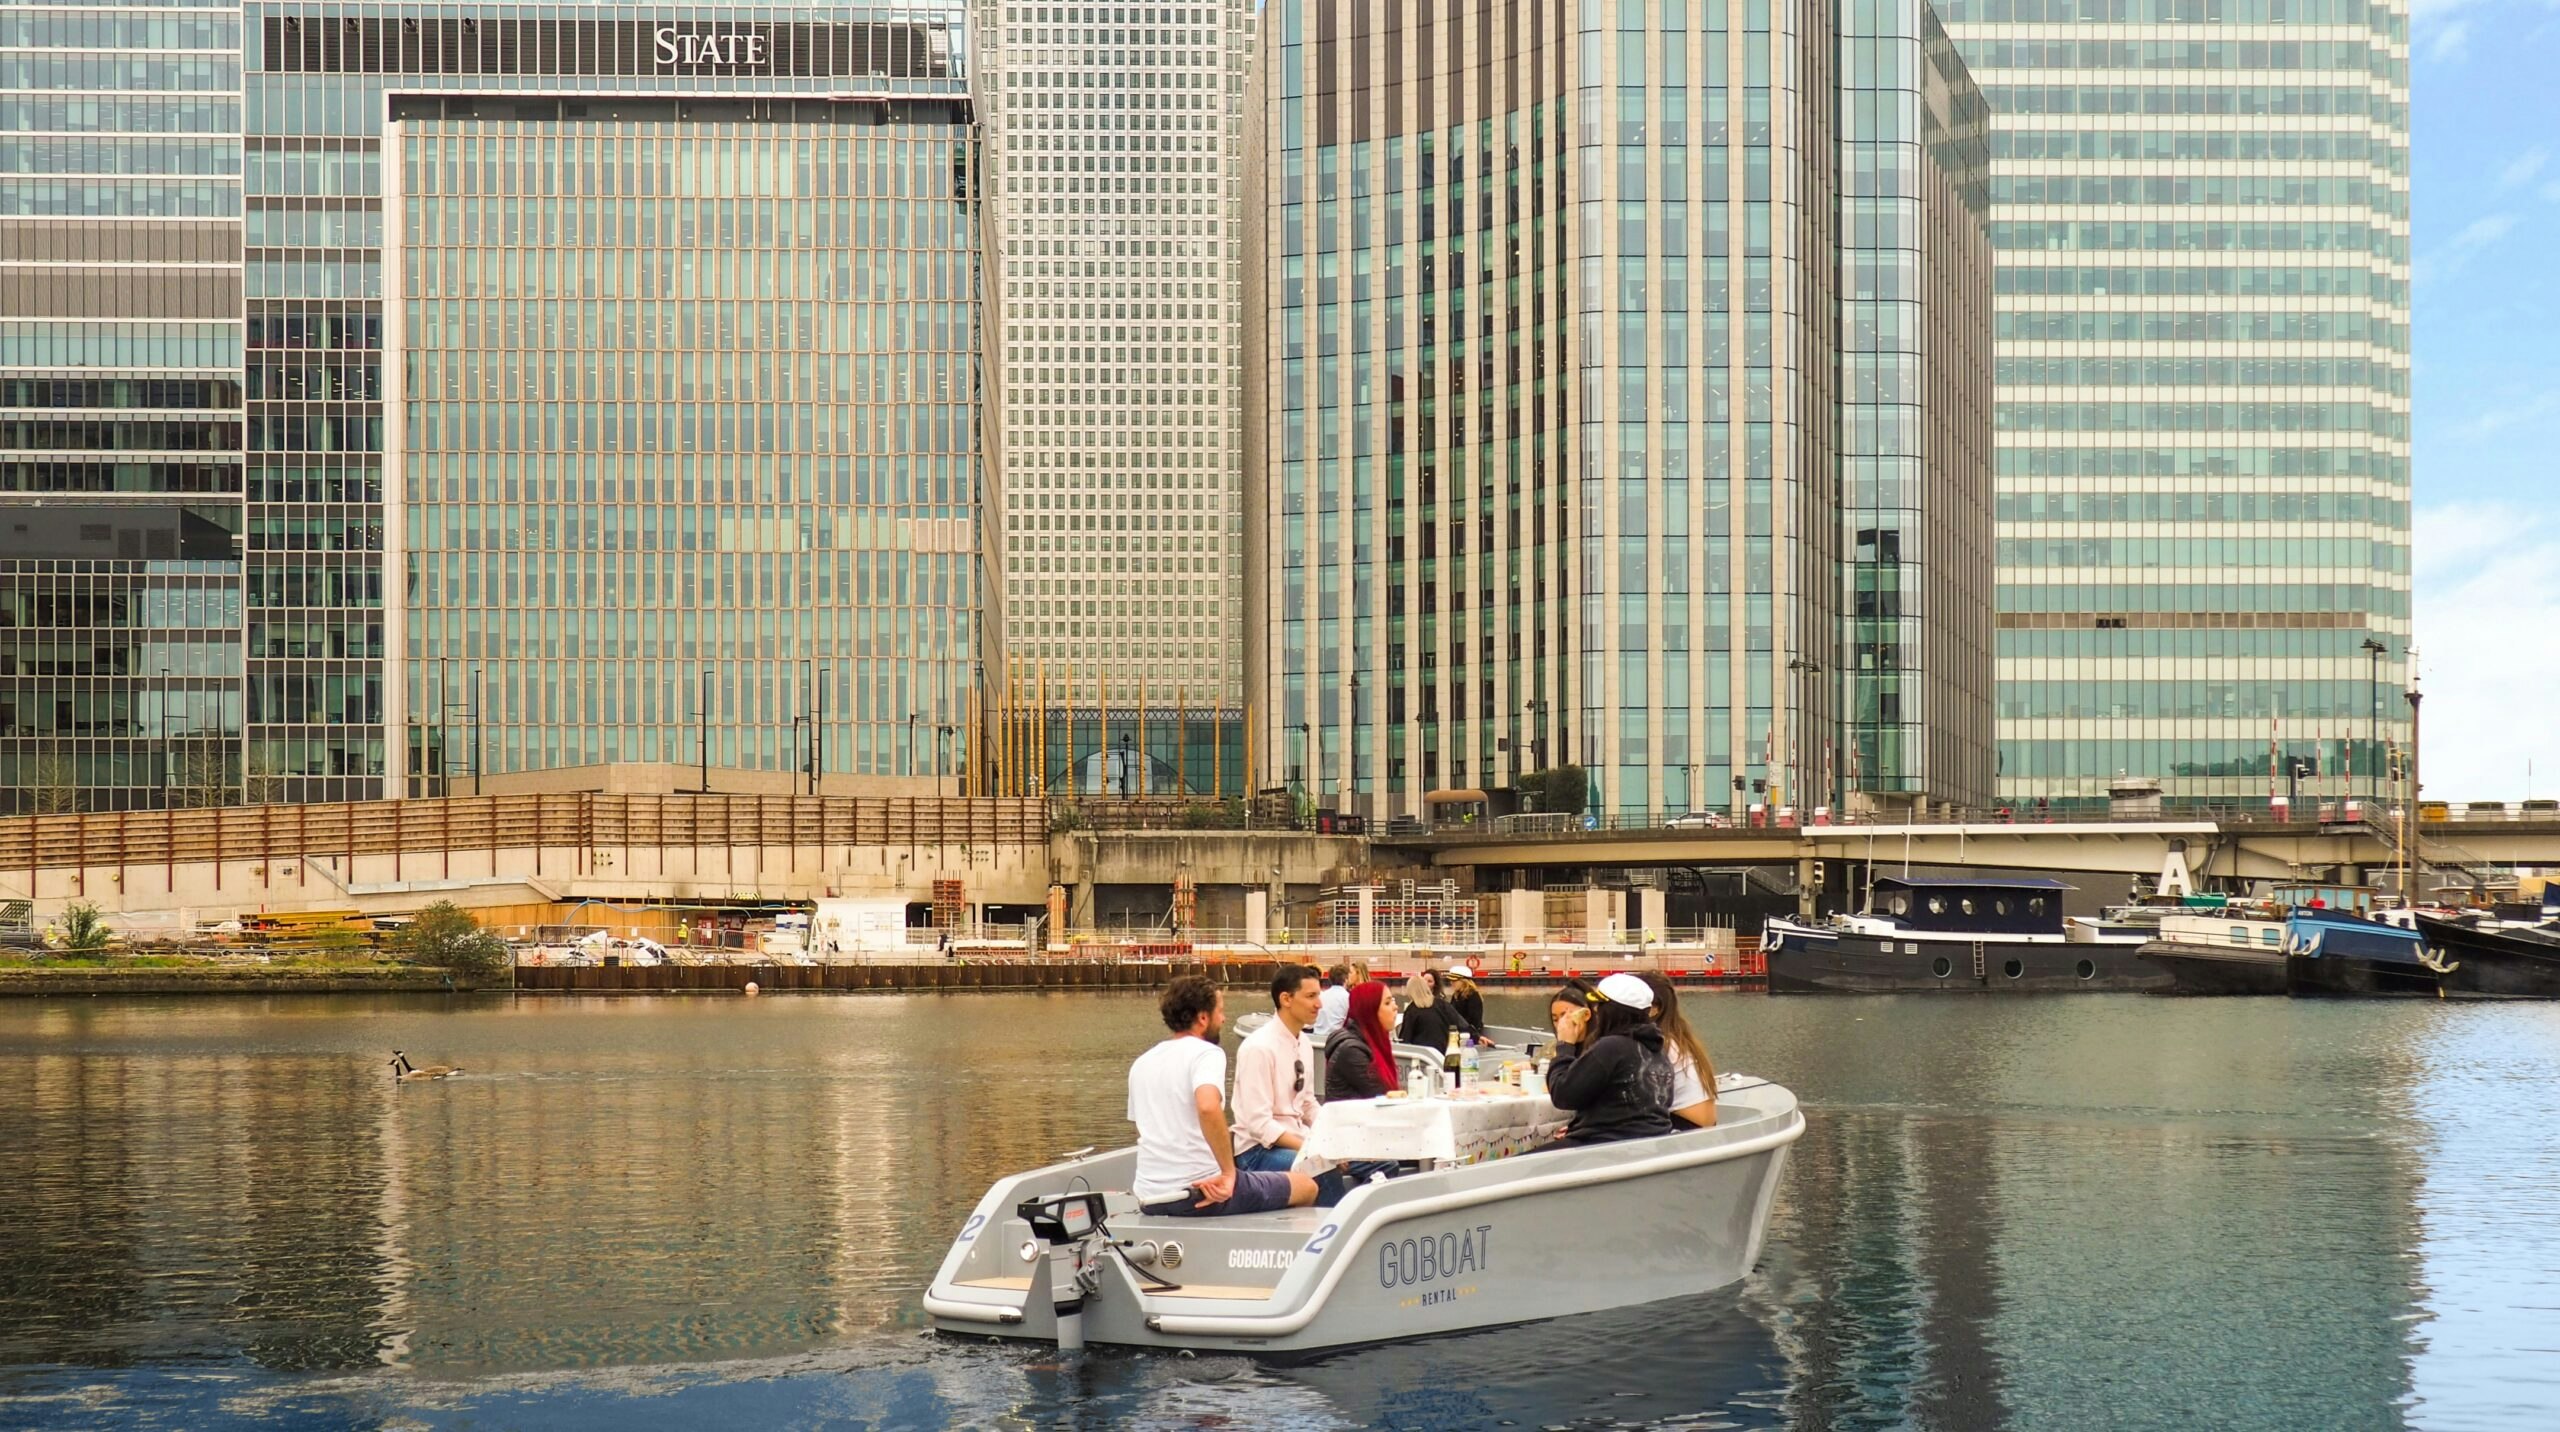 Goboat canary wharf